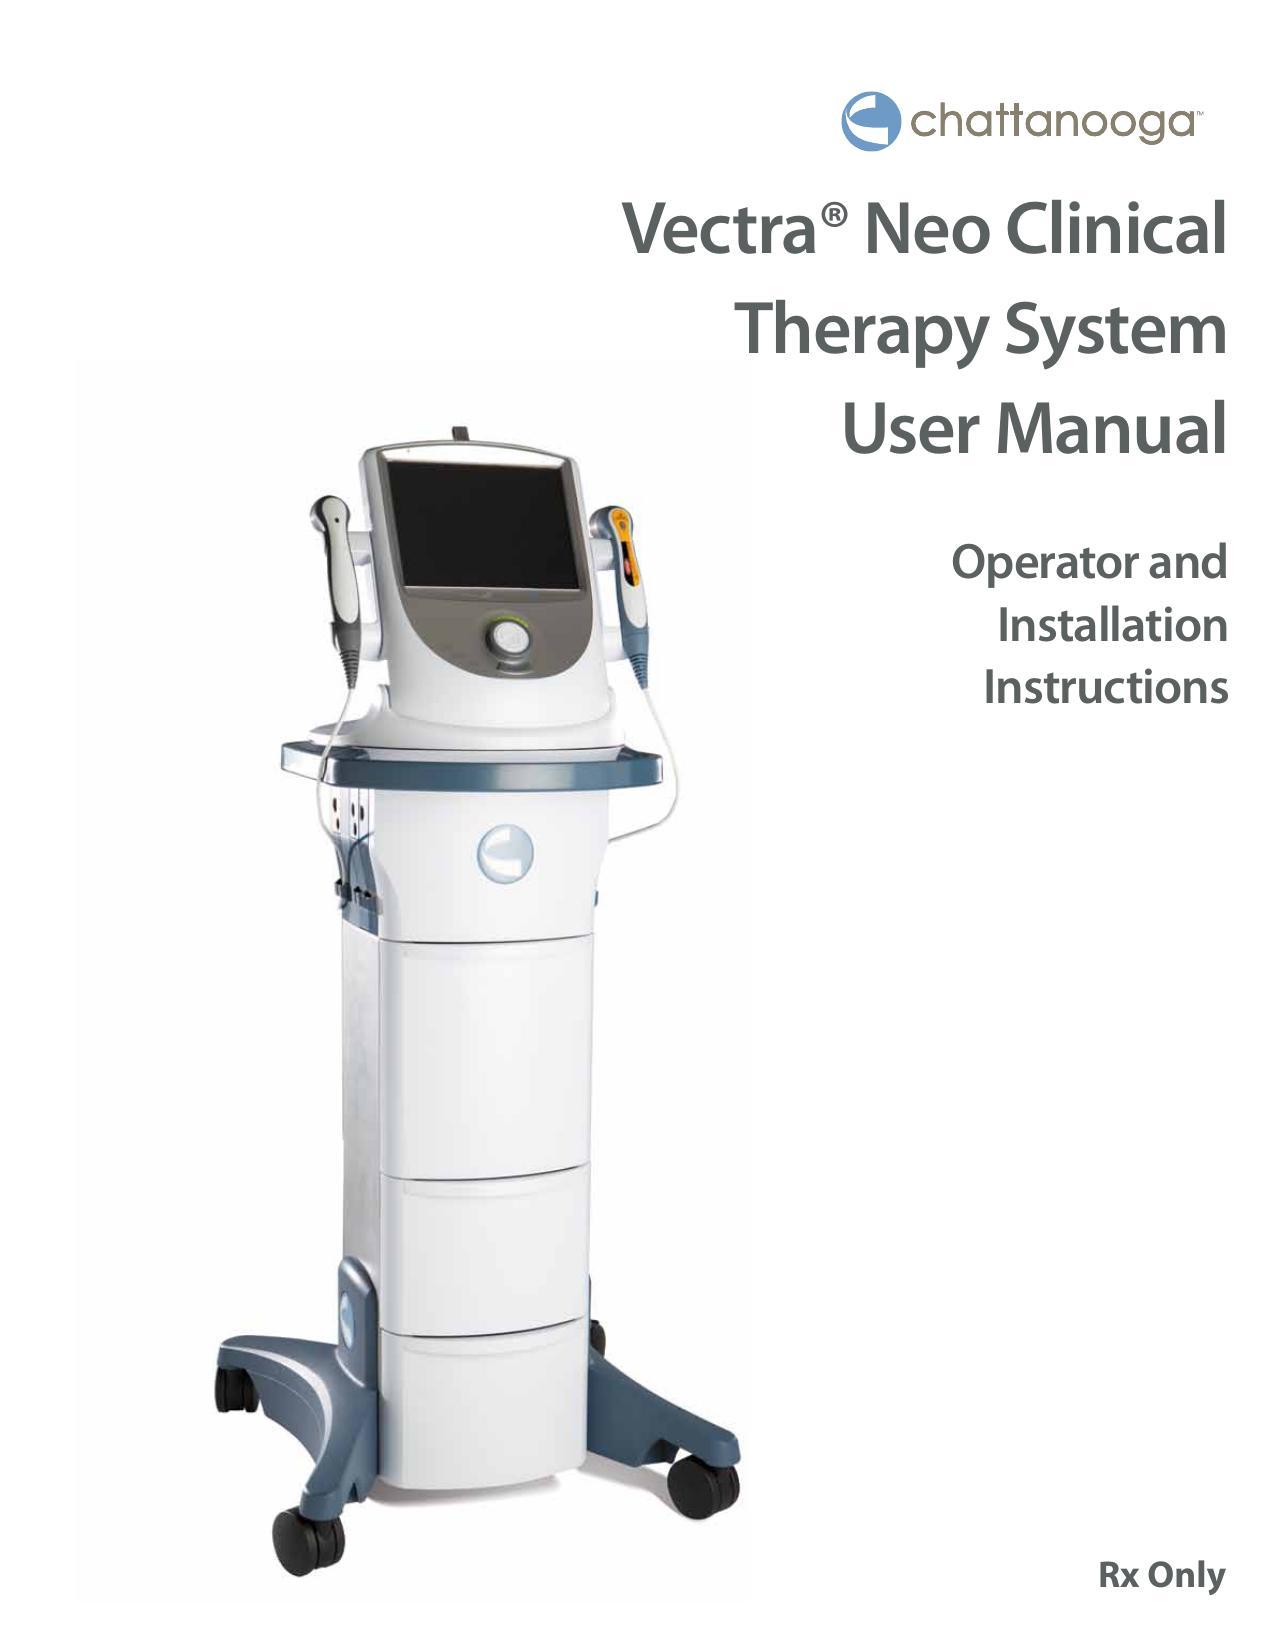 vectra-neo-clinical-therapy-system-user-manual.pdf